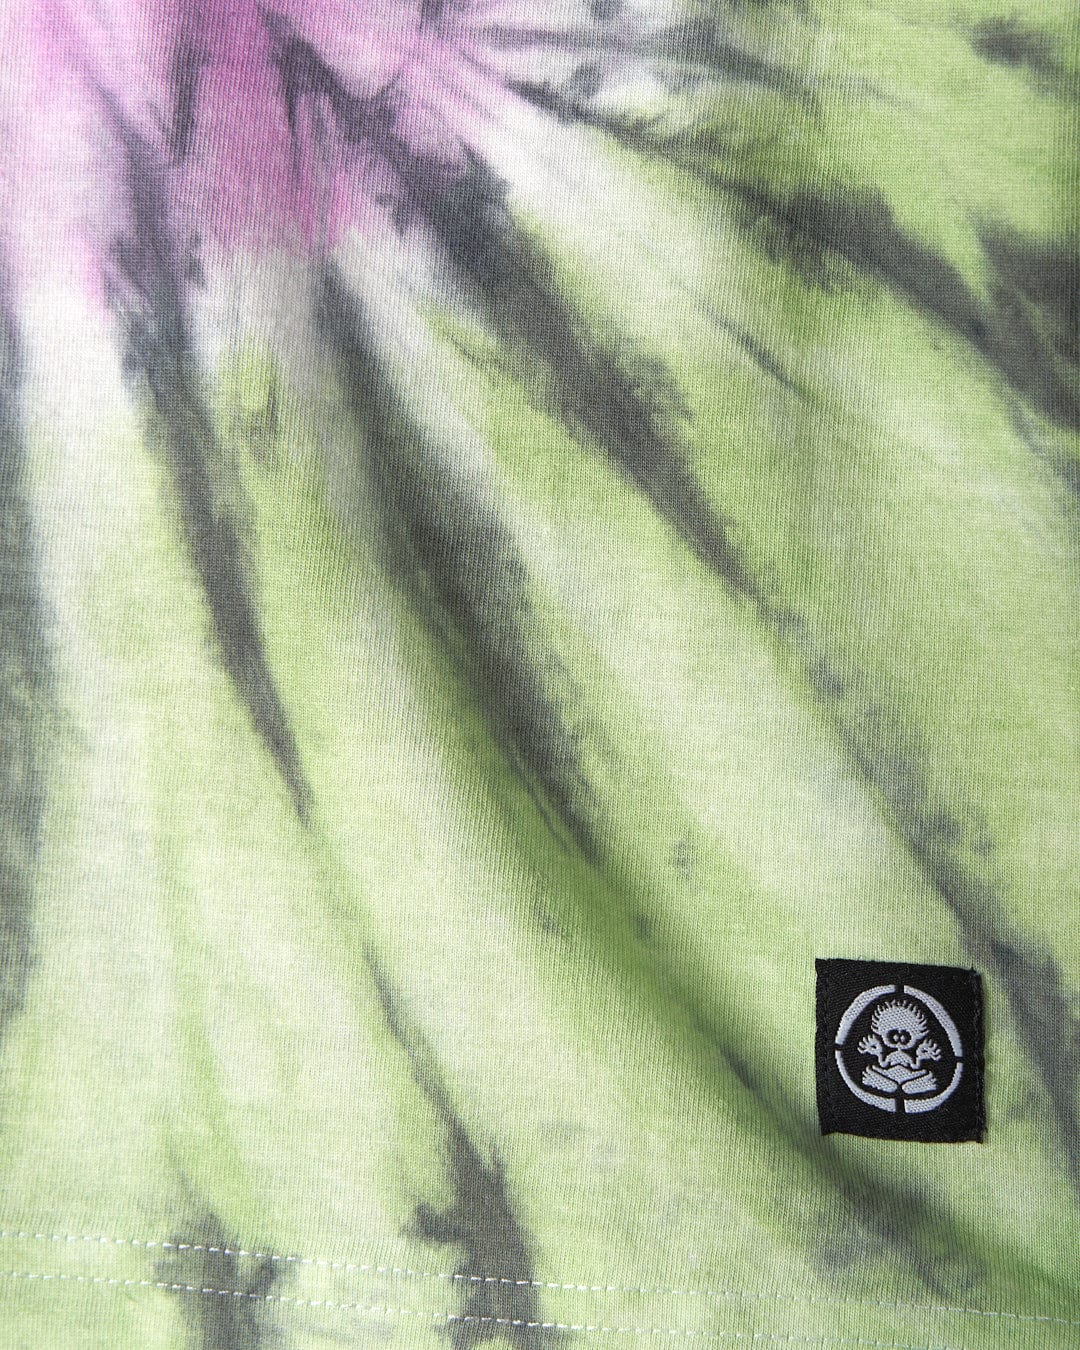 Close-up of a Rock Valley - Kids T-Shirt - Multi in green, black, and pink shades with a Saltrock branding tag featuring a skull and crossbones design.